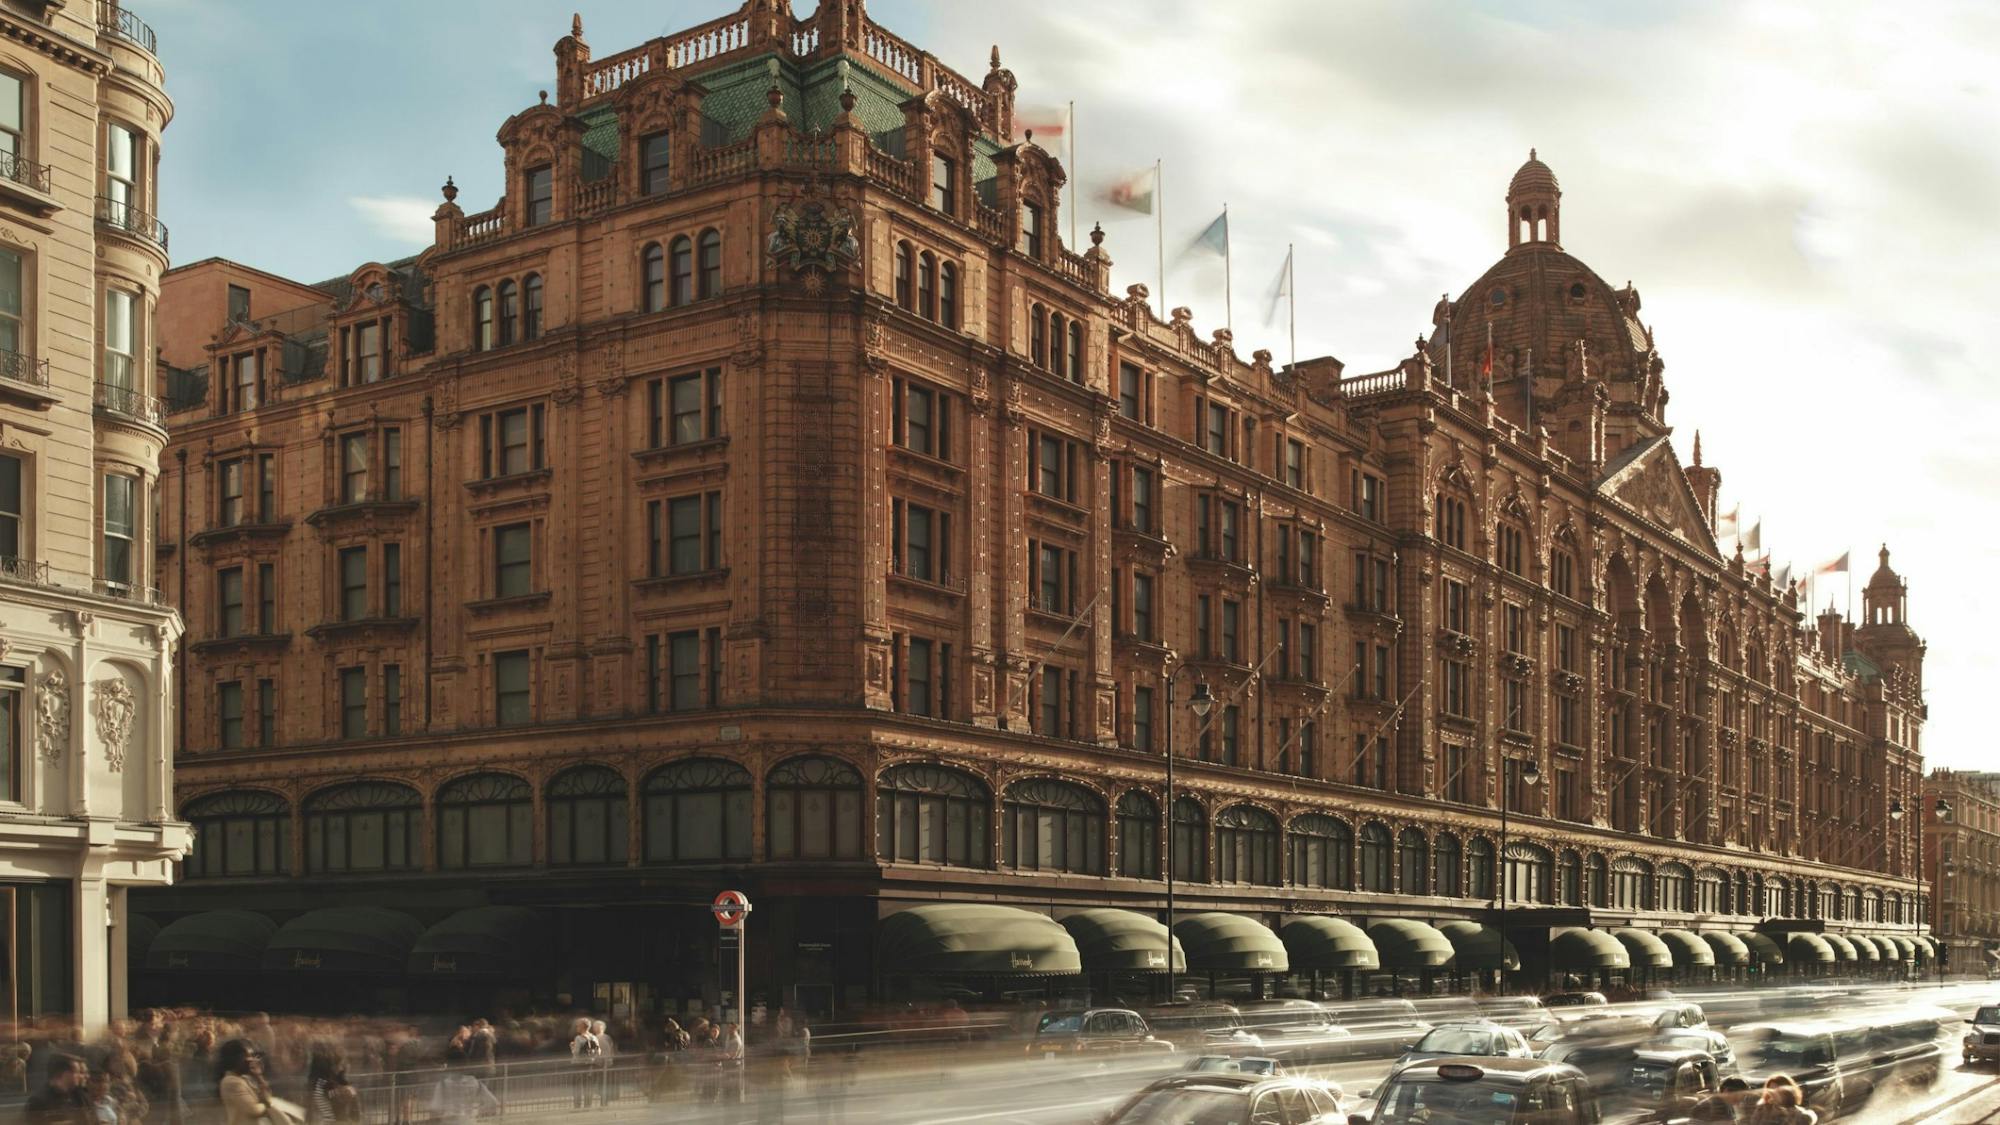 We like anything with the Harrods name on it': luxury brands